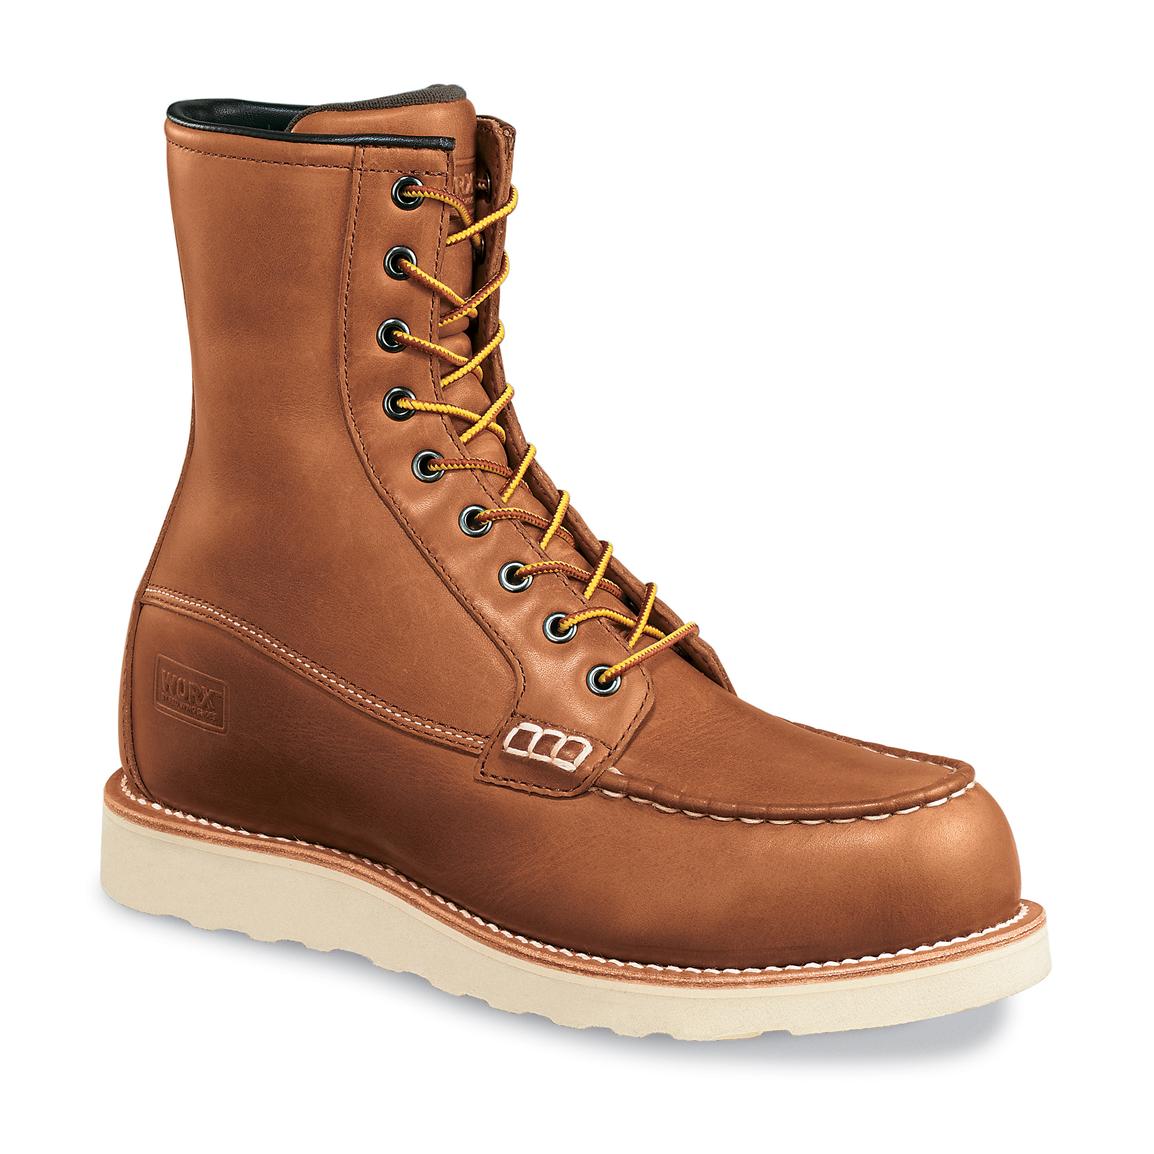 Red Wing Steel Toe Rubber Boots - www.inf-inet.com